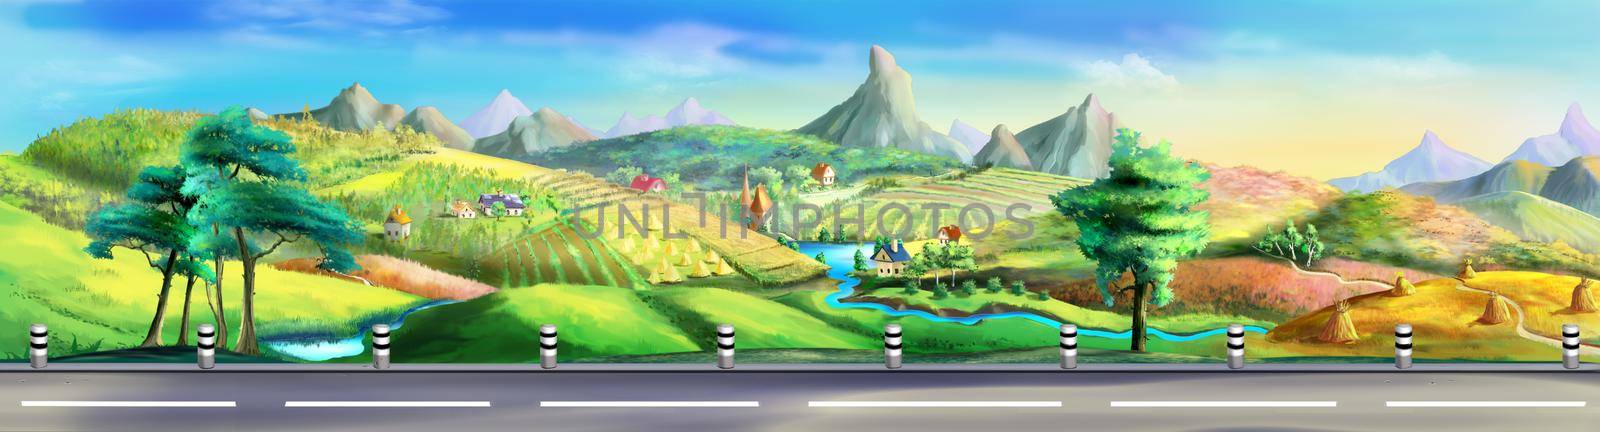 Scenic road through the mountains illustration by Multipedia